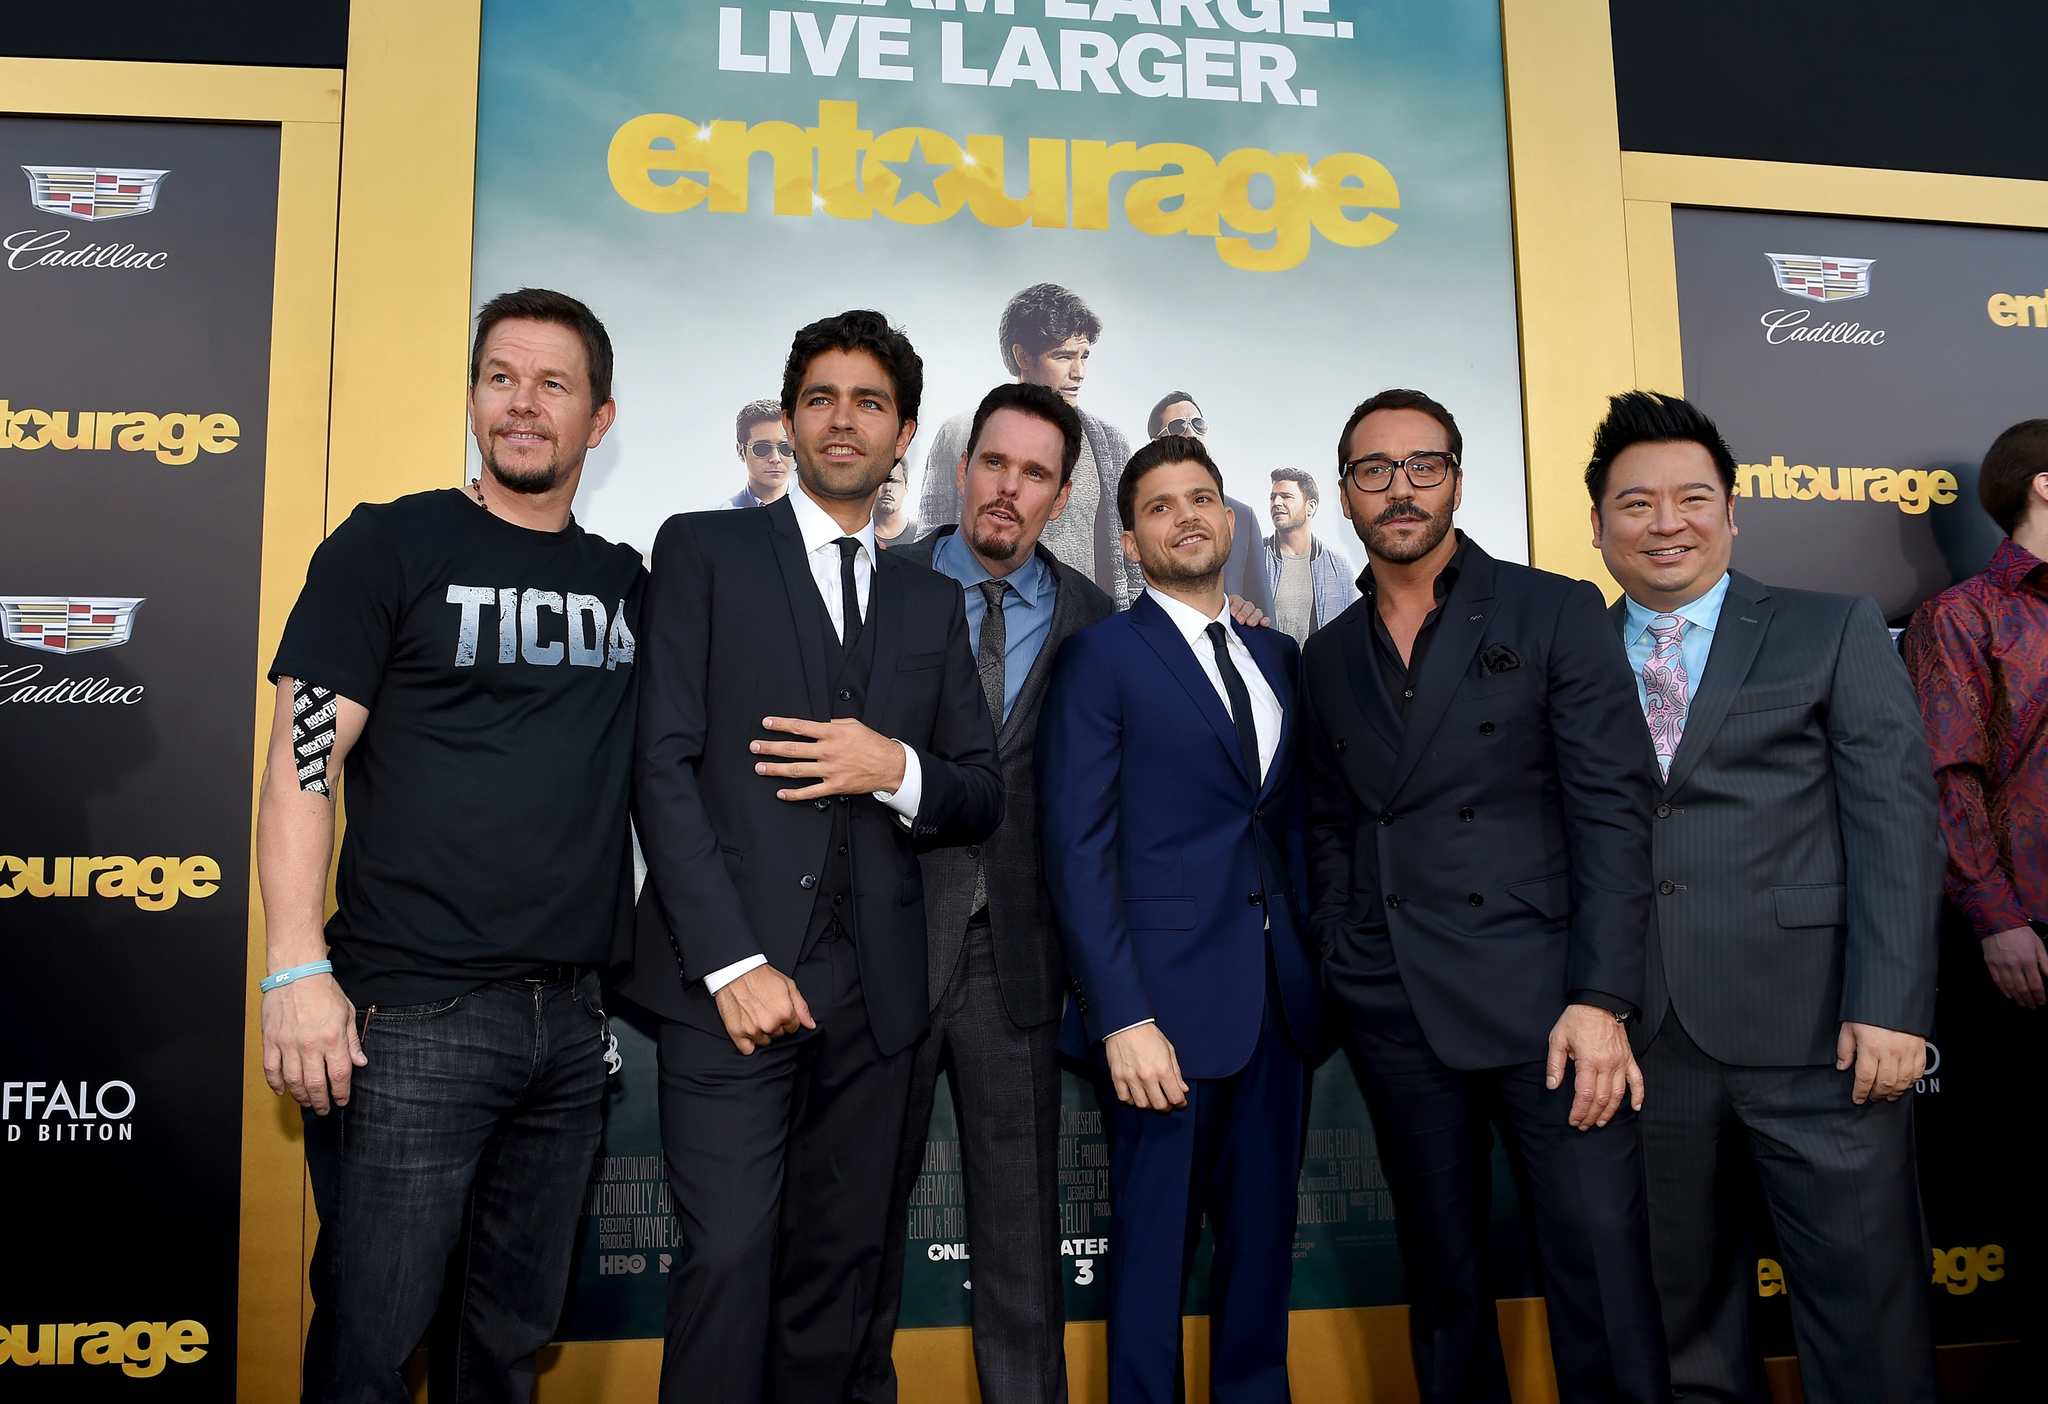 Mark Wahlberg, Kevin Dillon, Adrian Grenier, Jeremy Piven, Rex Lee and Jerry Ferrara at event of Entourage (2015)